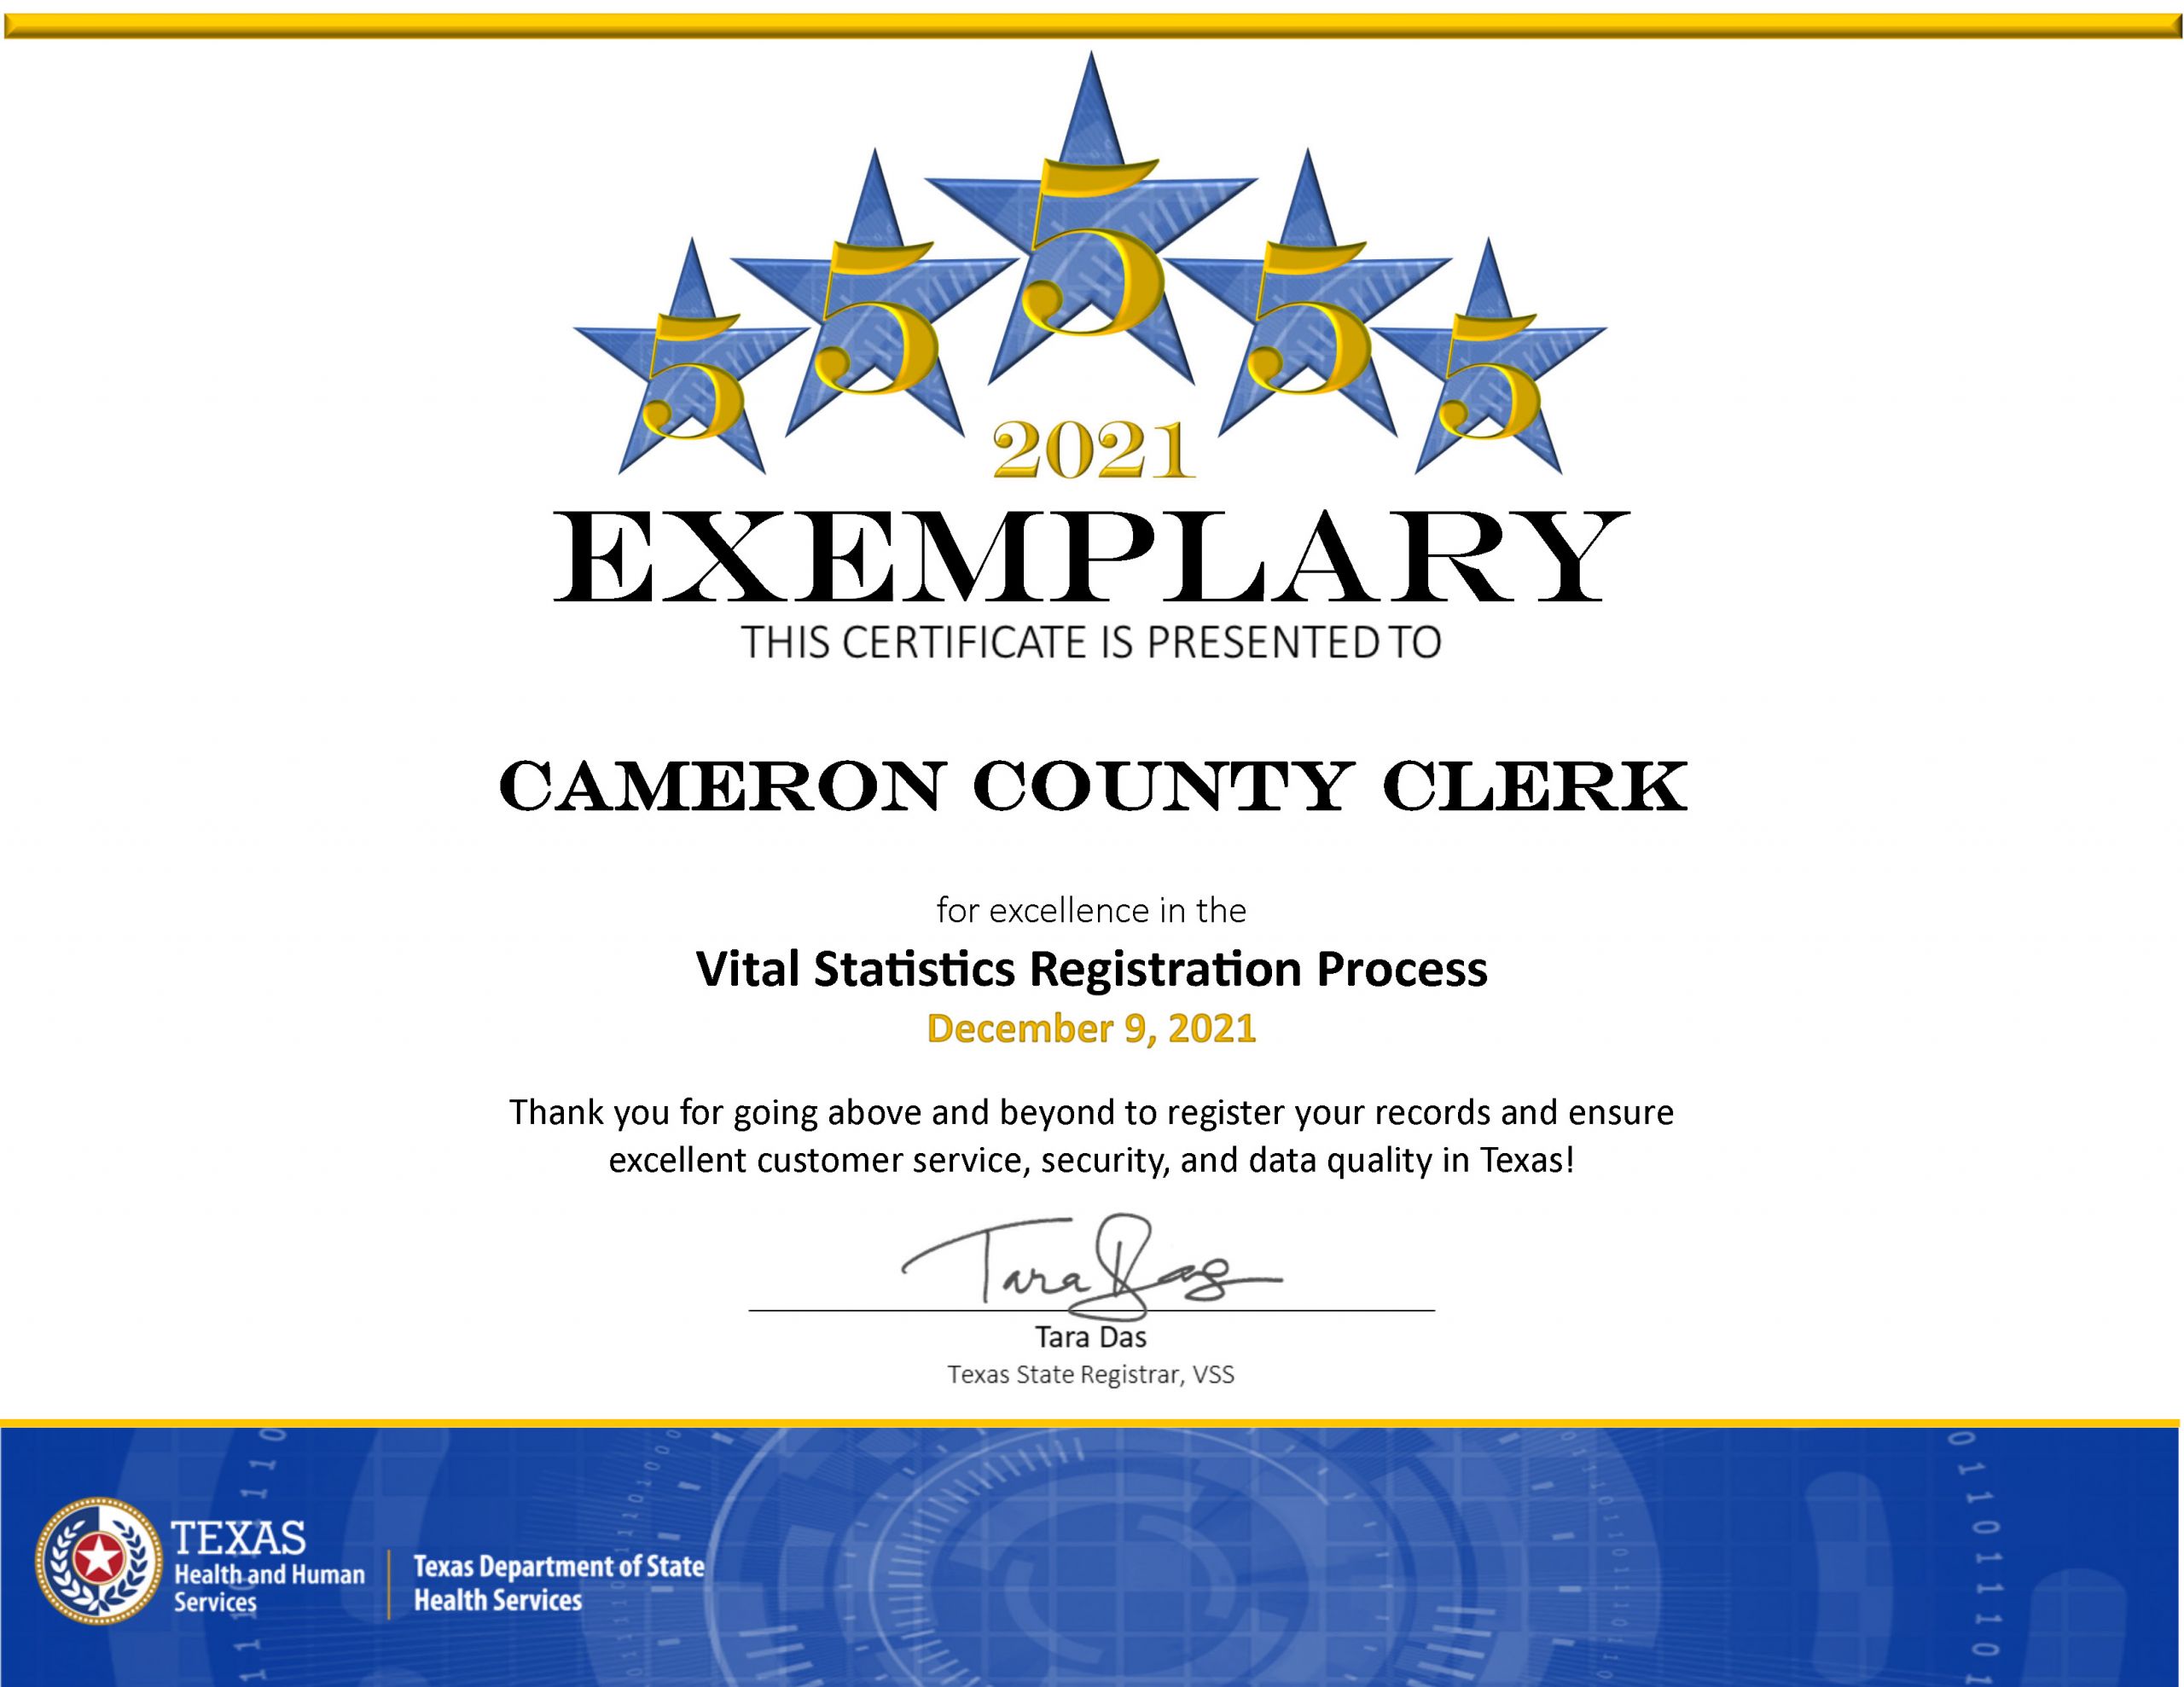 CAMERON COUNTY CLERK Exemplary 5 Star Certificate V1 Scaled